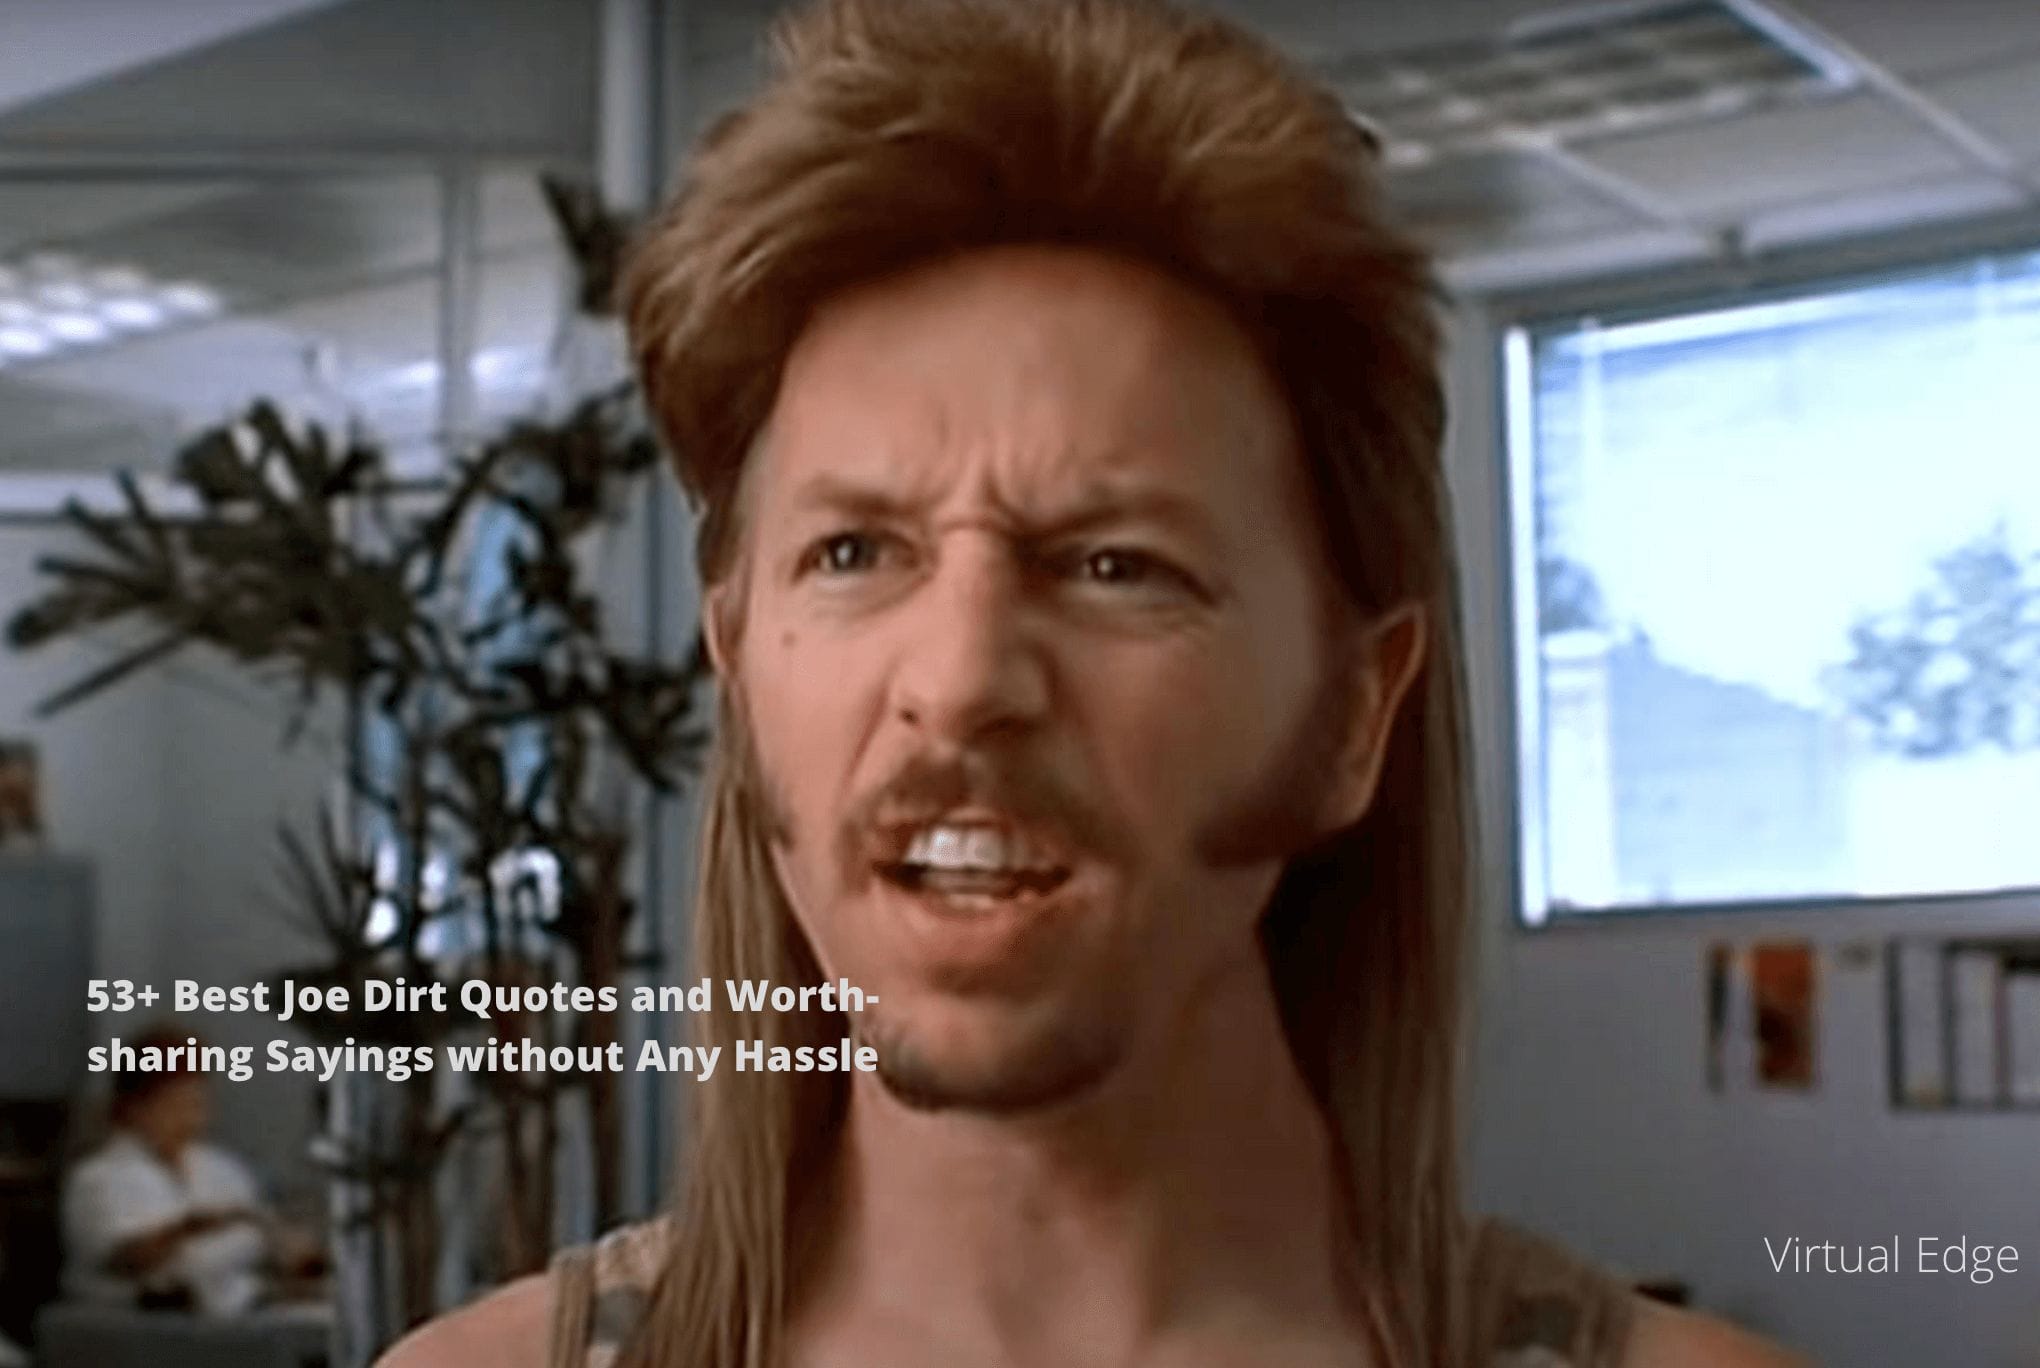 53+ Best Joe Dirt Quotes and Worth-sharing Sayings without Any Hassle